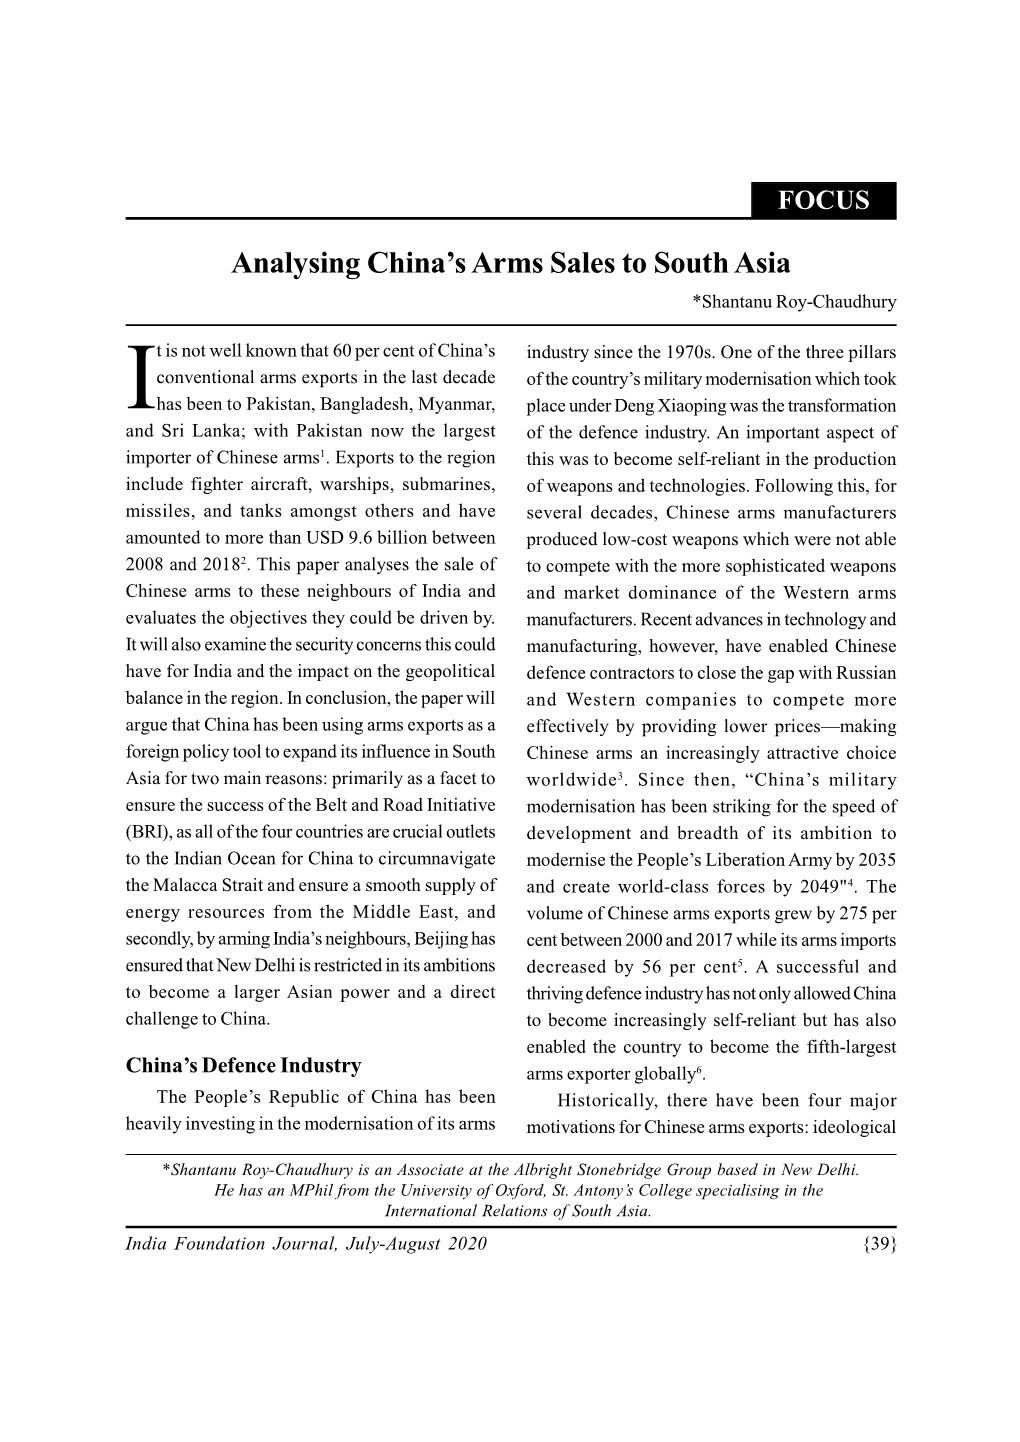 Analysing China's Arms Sales to South Asia